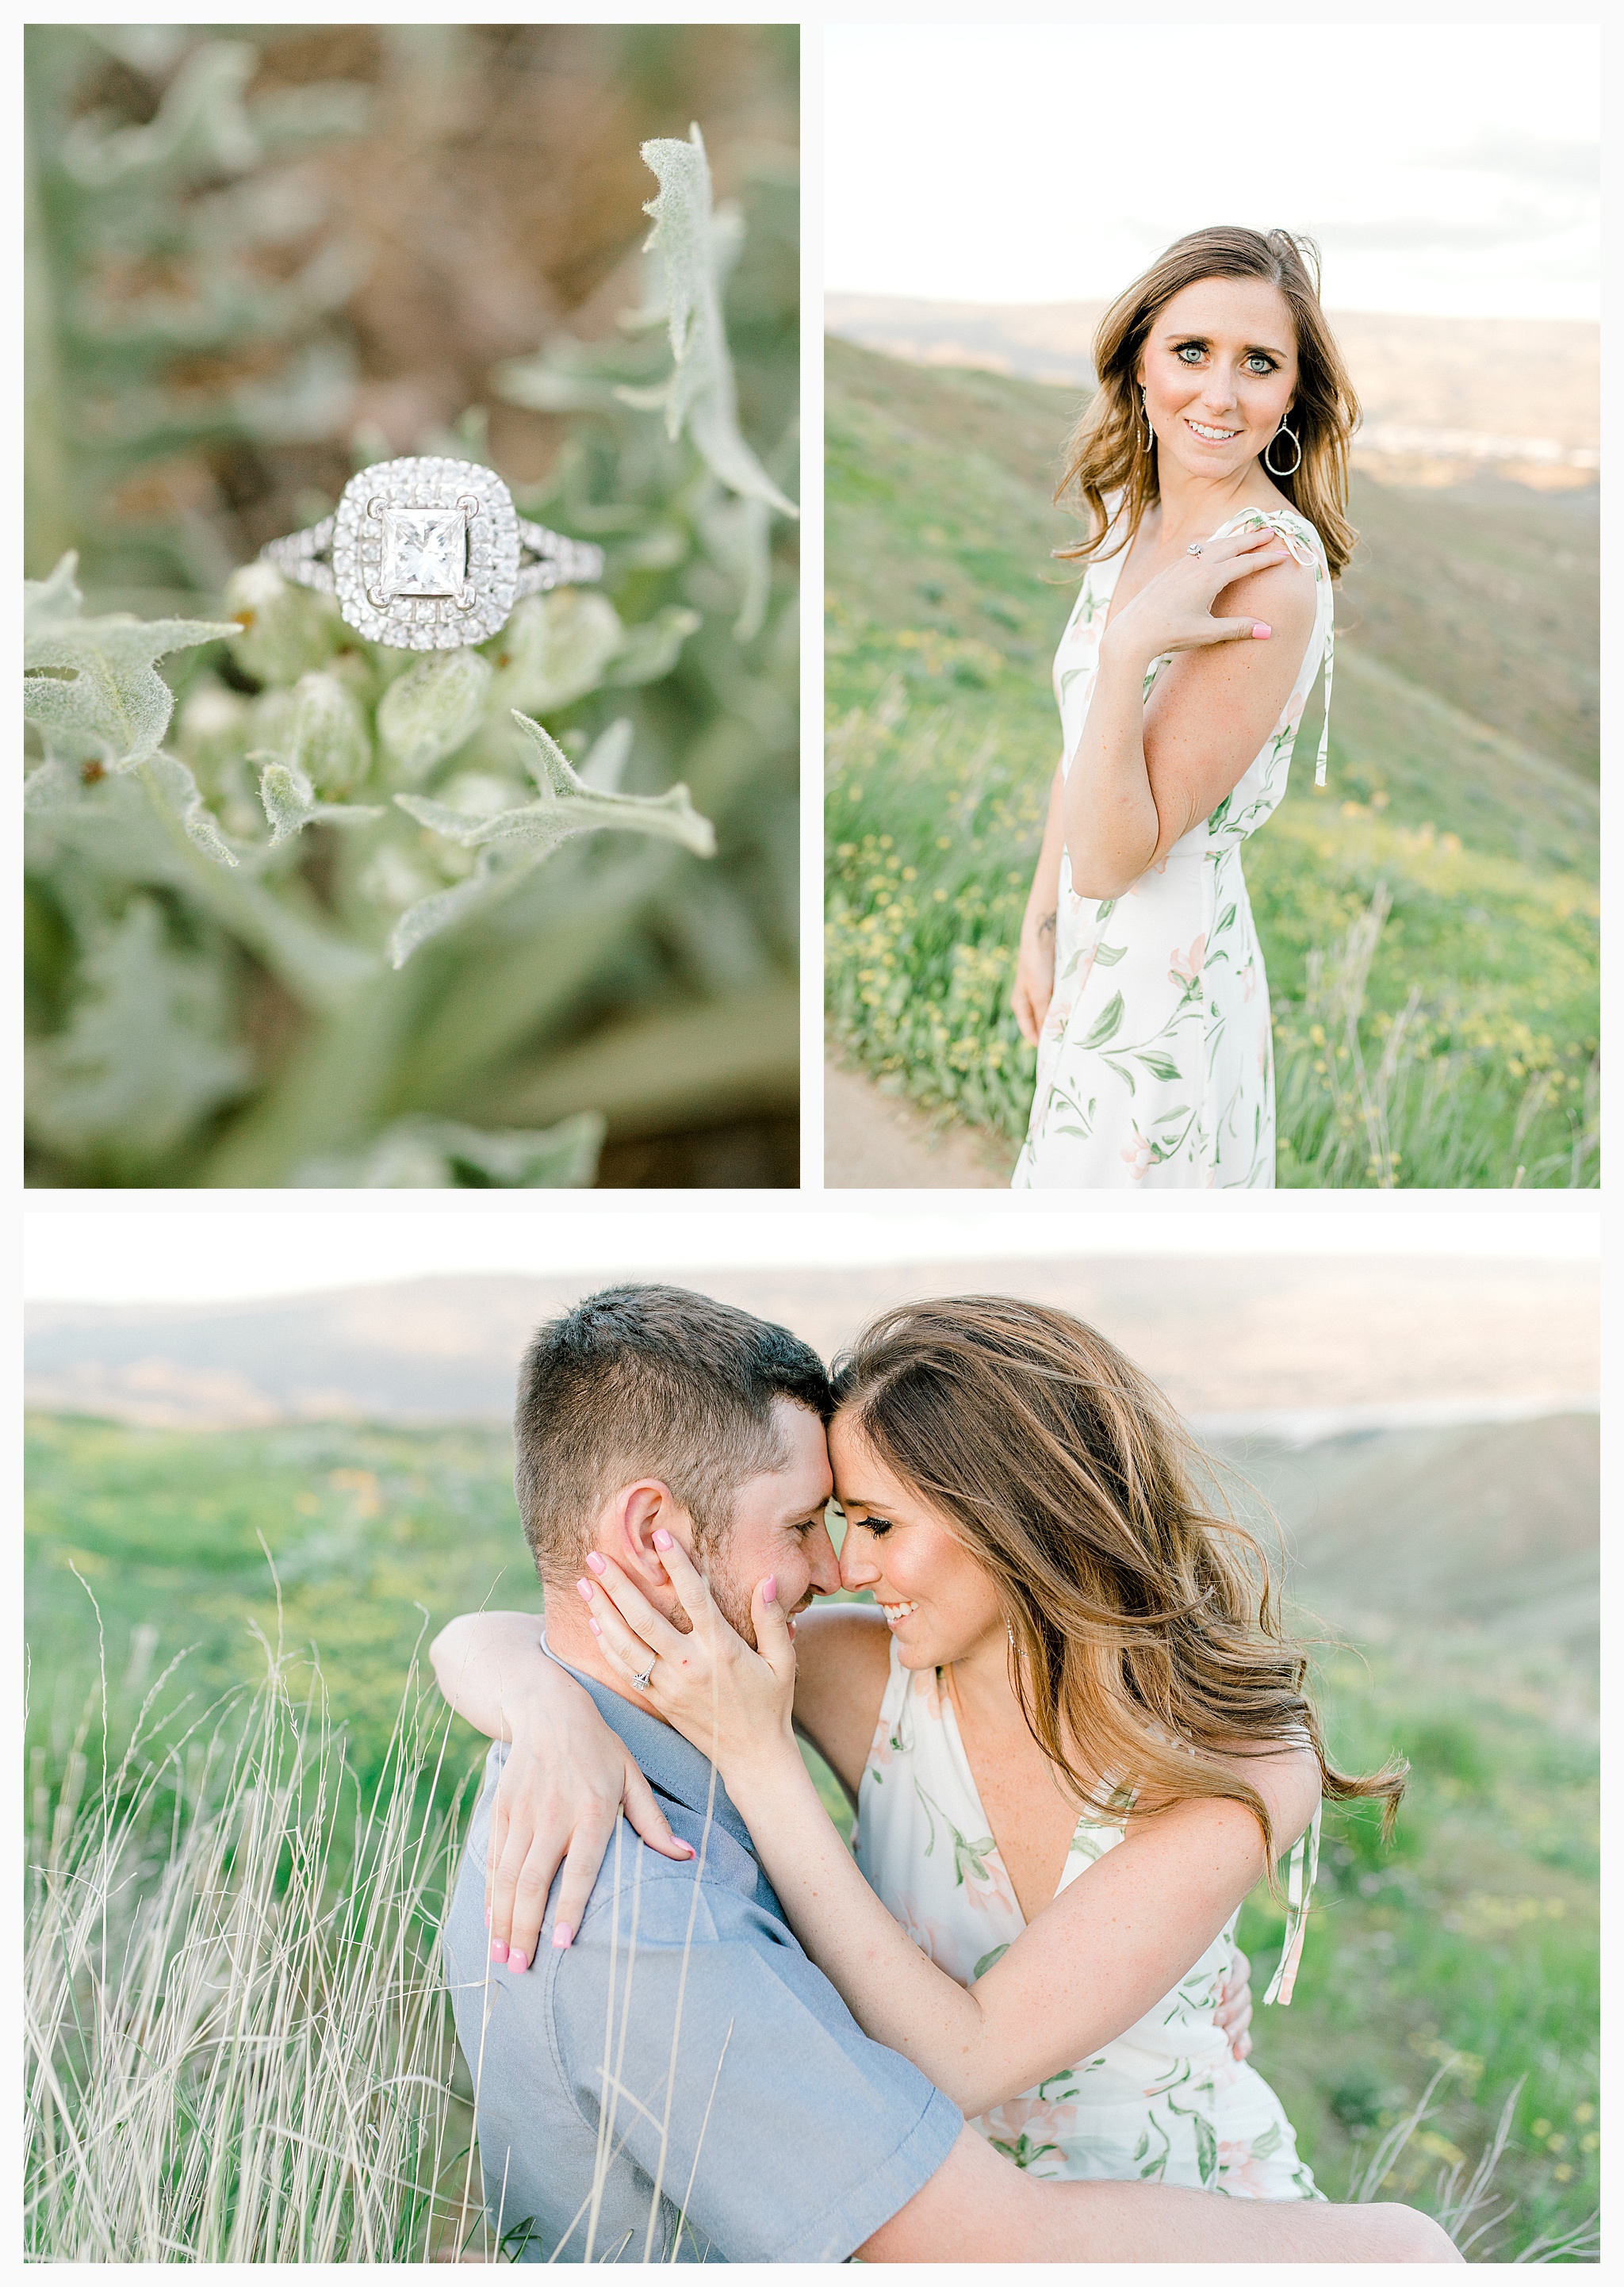 Engagement session amongst the wildflowers in Wenatchee, Washington | Engagement Session Outfit Inspiration for Wedding Photography with Emma Rose Company | Light and Airy PNW Photographer, Seattle Bride_0015.jpg